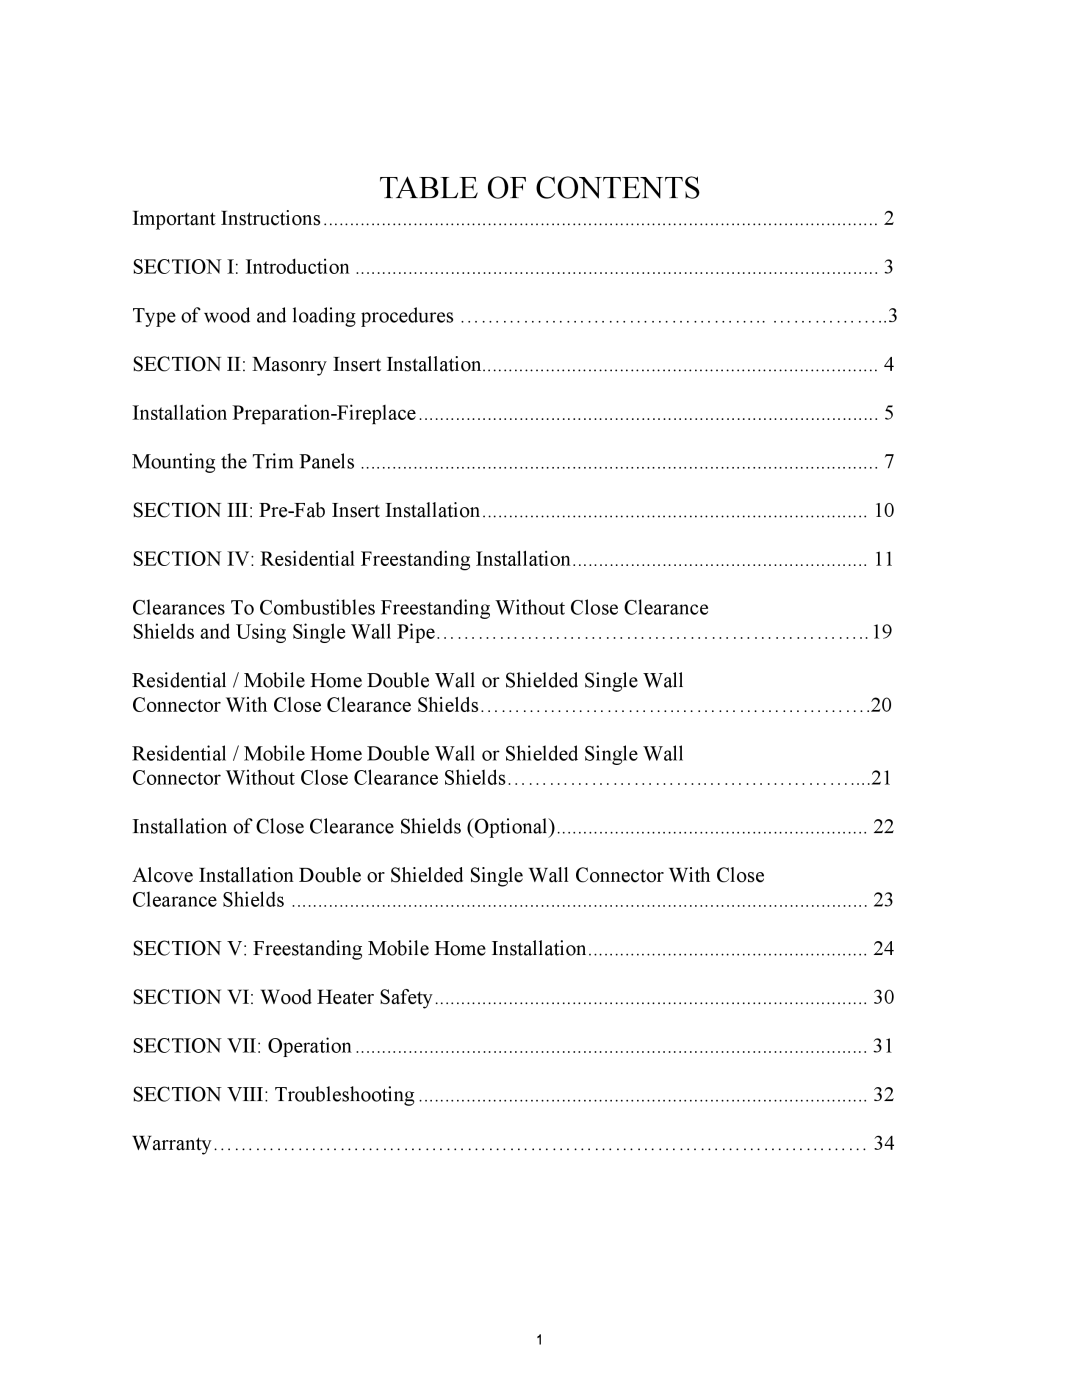 New Buck Corporation 74 installation instructions Table Of Contents 